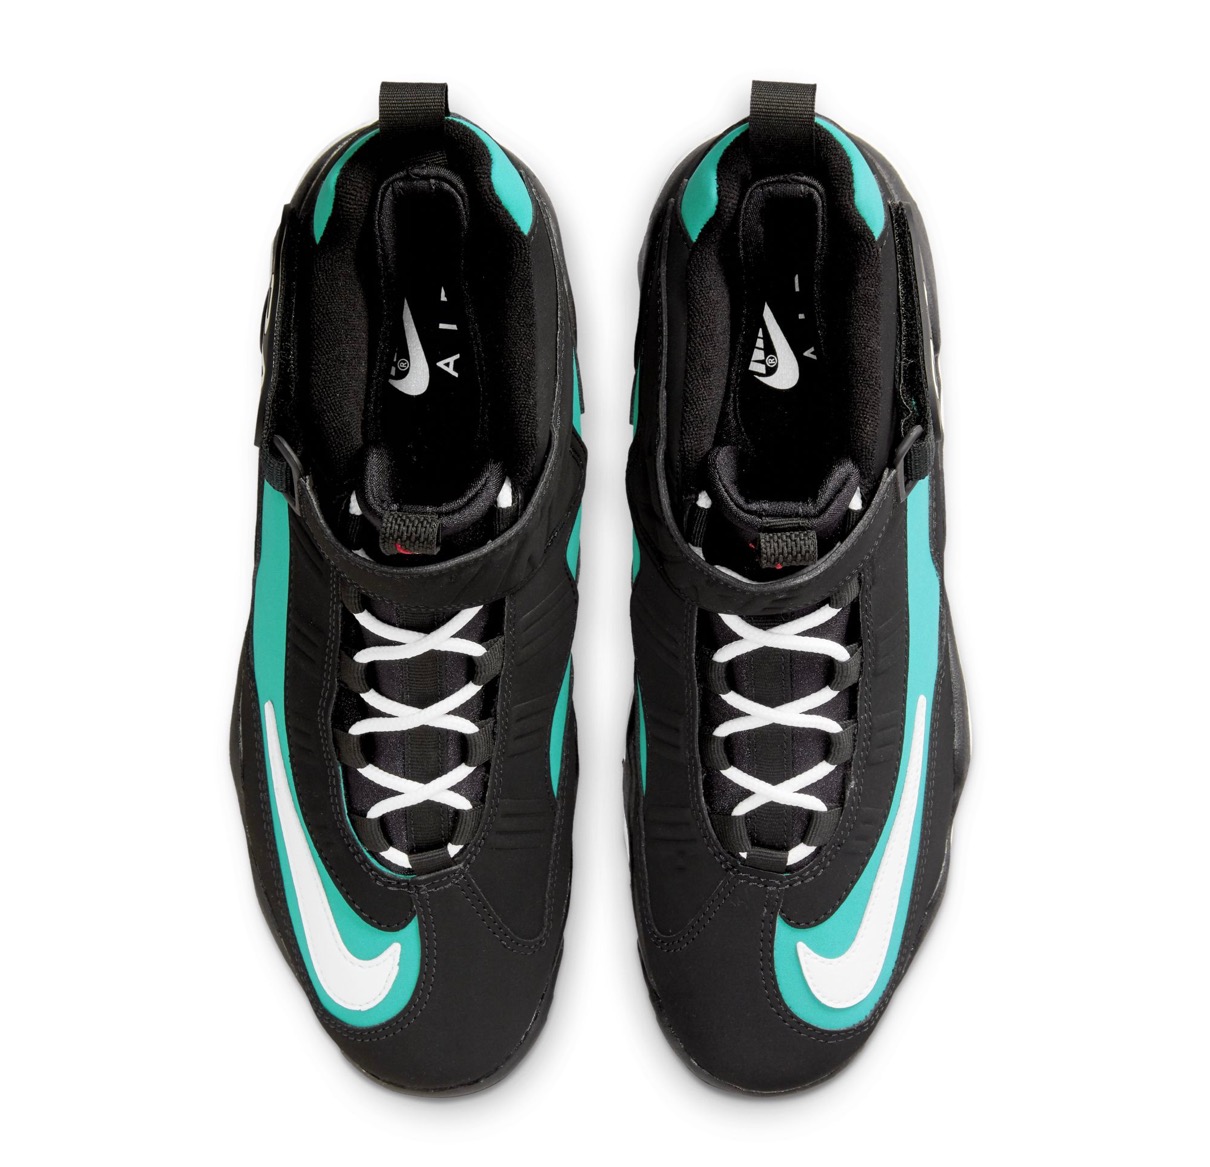 Nike】Air Griffey Max 1 “Freshwater”が2021年に復刻発売予定 | UP TO 